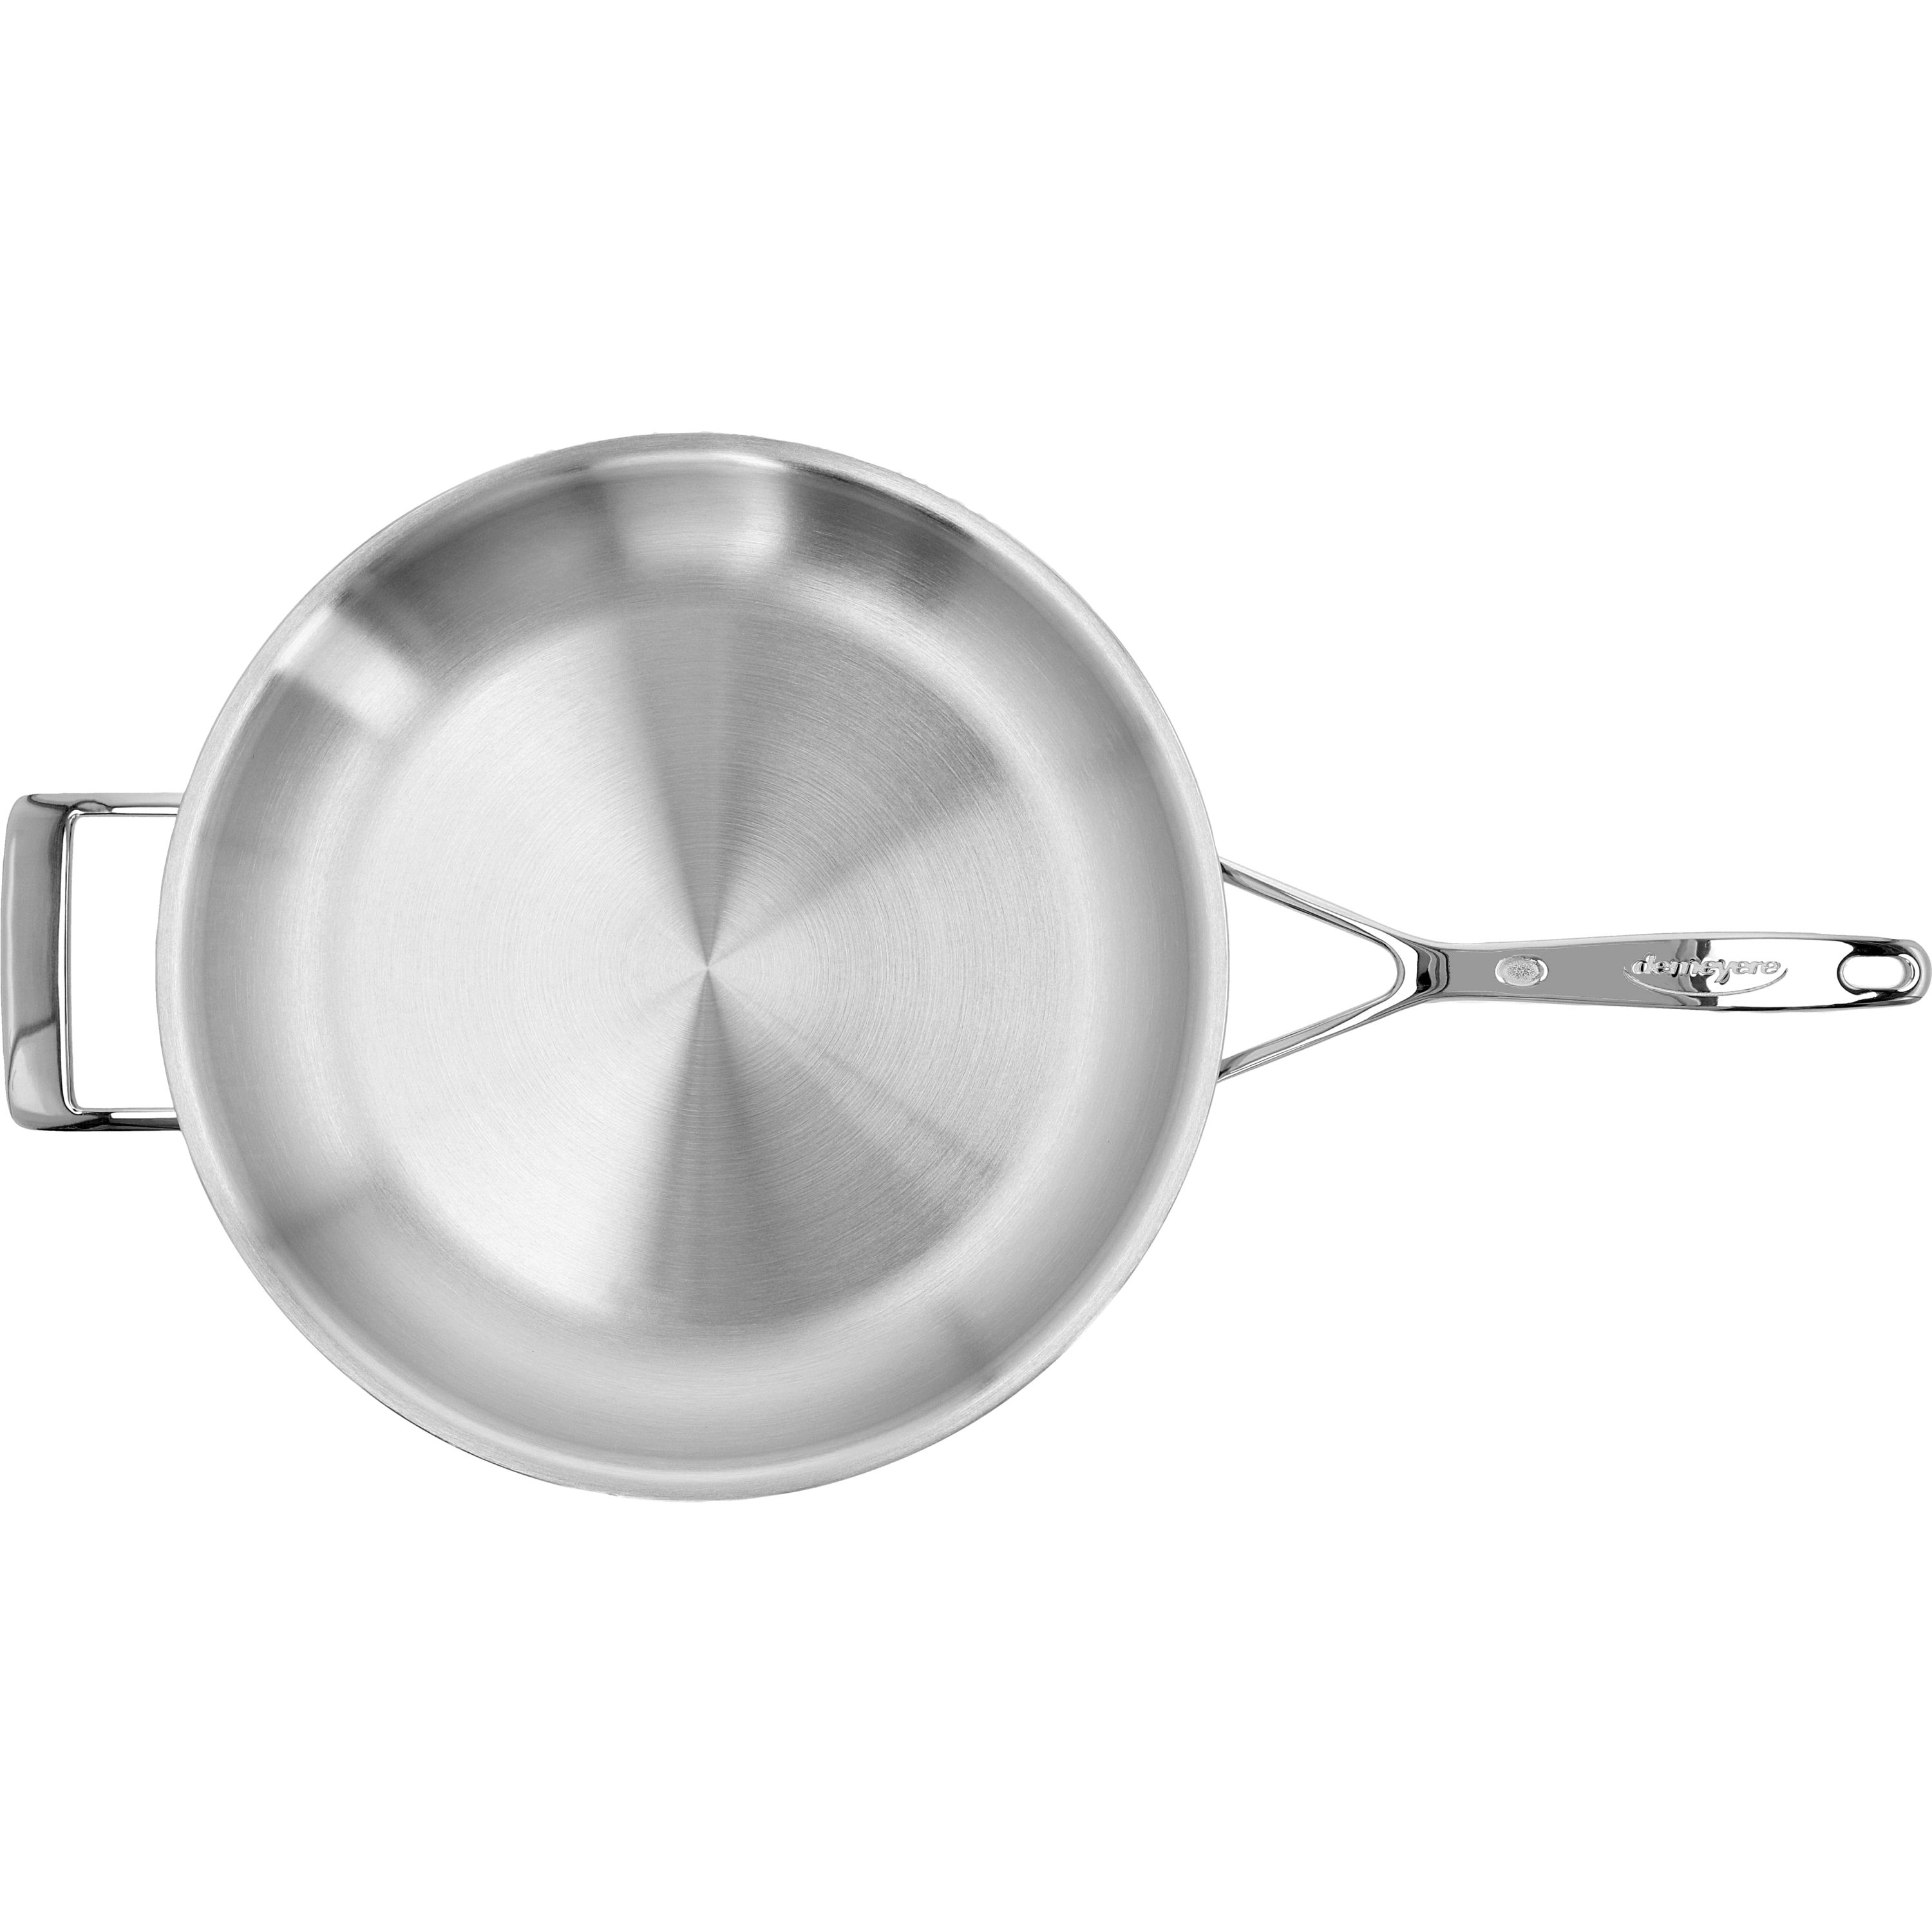 Demeyere AluPro Ceramic 12-inch Aluminum Nonstick Fry Pan, 12-inch - Fry's  Food Stores